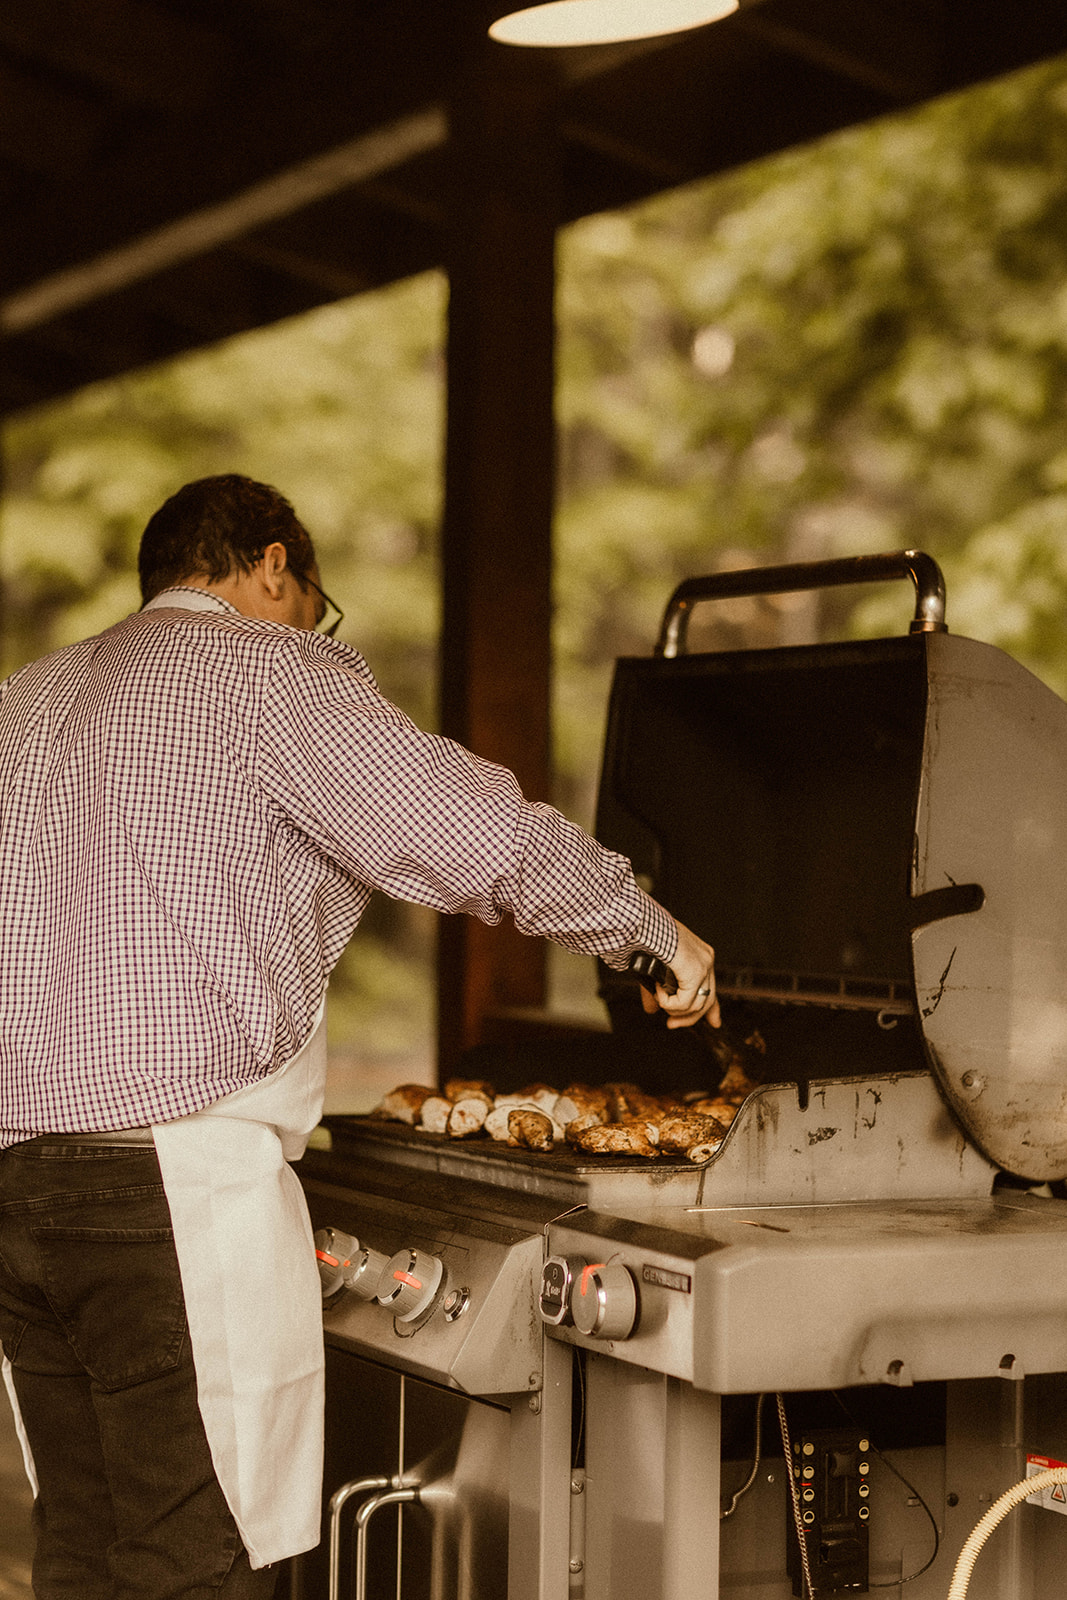 A chef works the grill at the dreamy EBS view lodge nestled in the Adirondack mountains